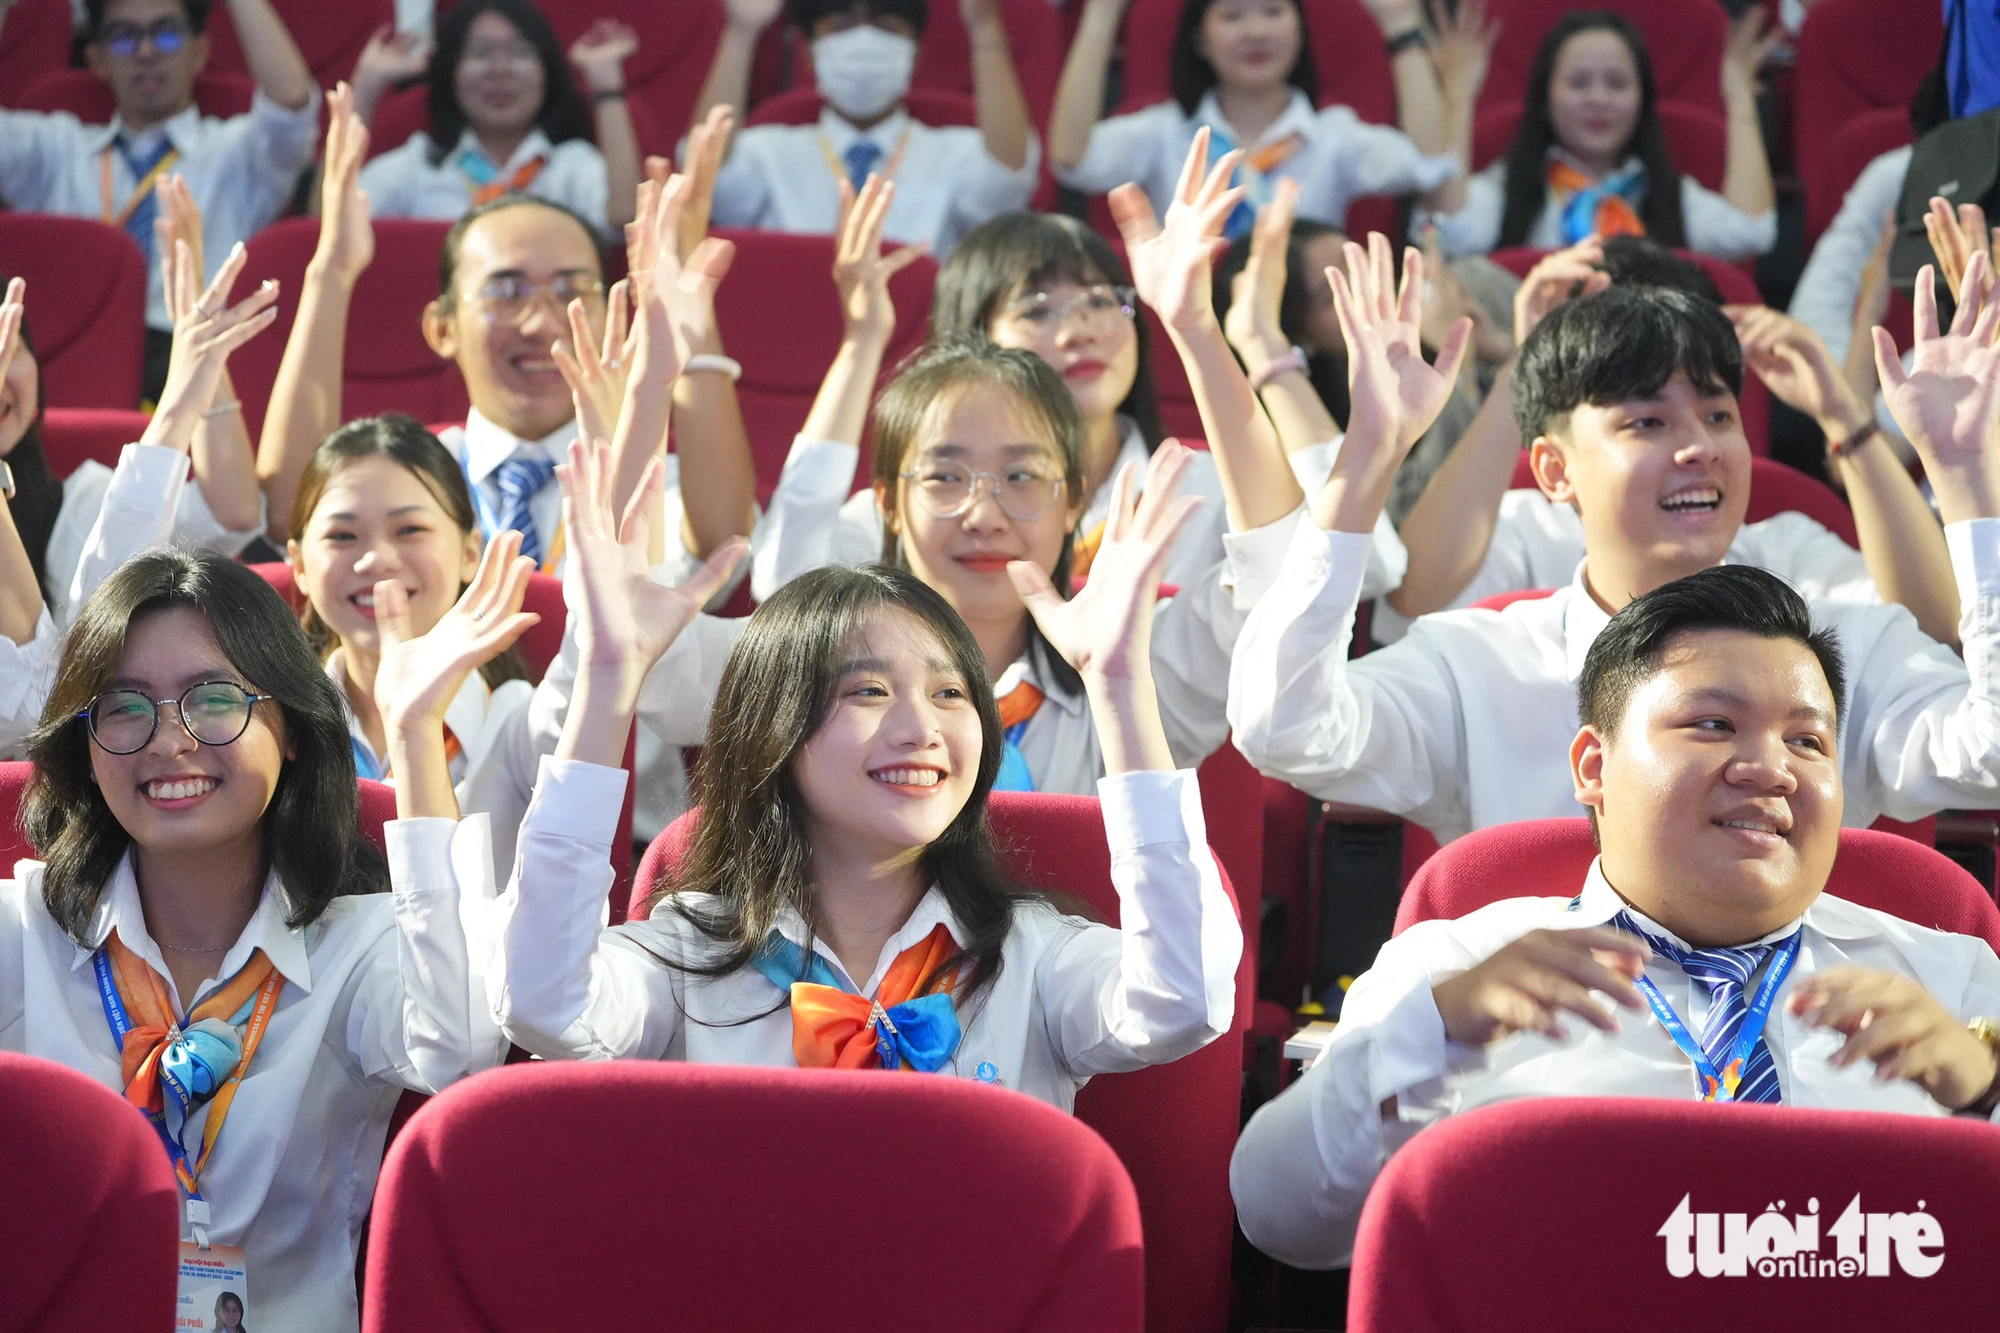 Joyful atmosphere at the opening session of the 7th Congress of the Vietnamese Student Union in Ho Chi Minh City on the morning of November 4 - Photo: Huế Hanh